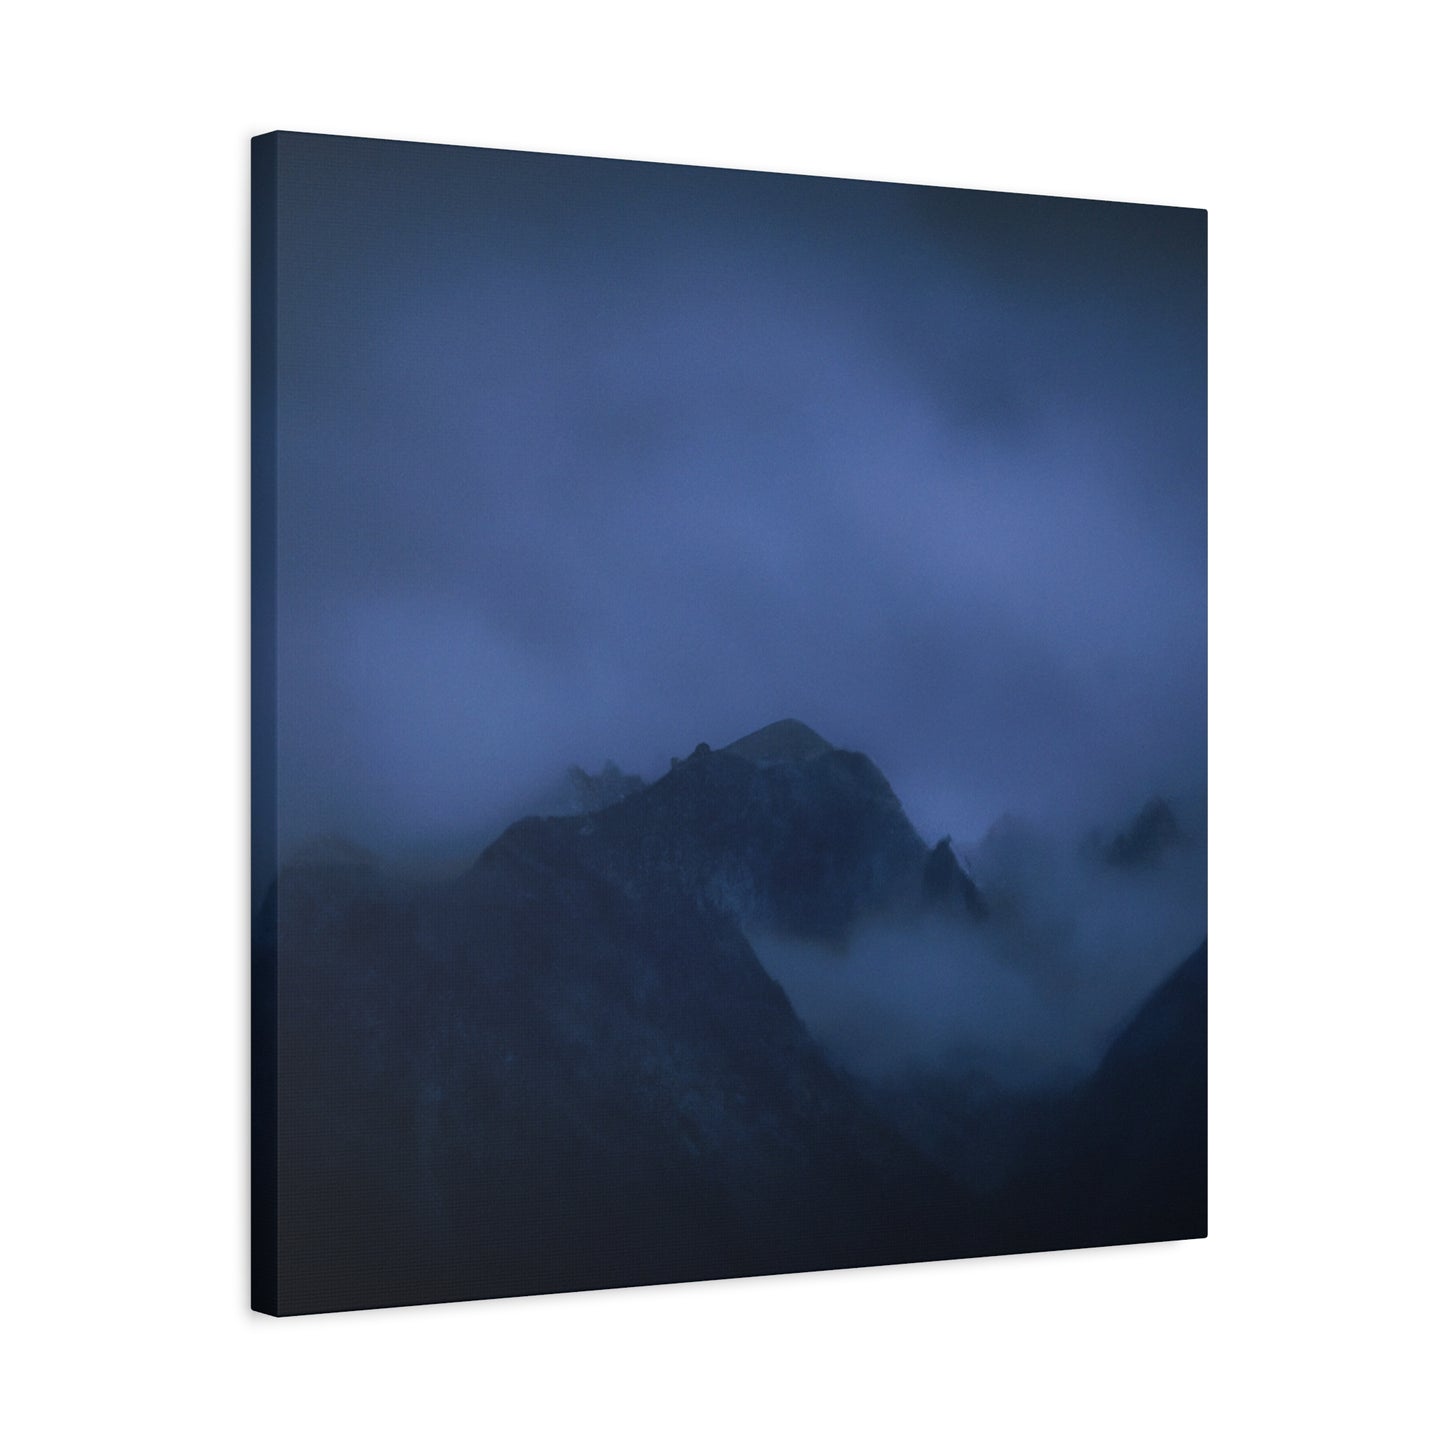 Immerse yourself in the dramatic beauty of nature with this stormy mountain digital print. The dark, moody skies and jagged mountain peaks capture the awe-inspiring power of nature, making it an unforgettable addition to any space. Perfect for adding depth and emotion to your decor